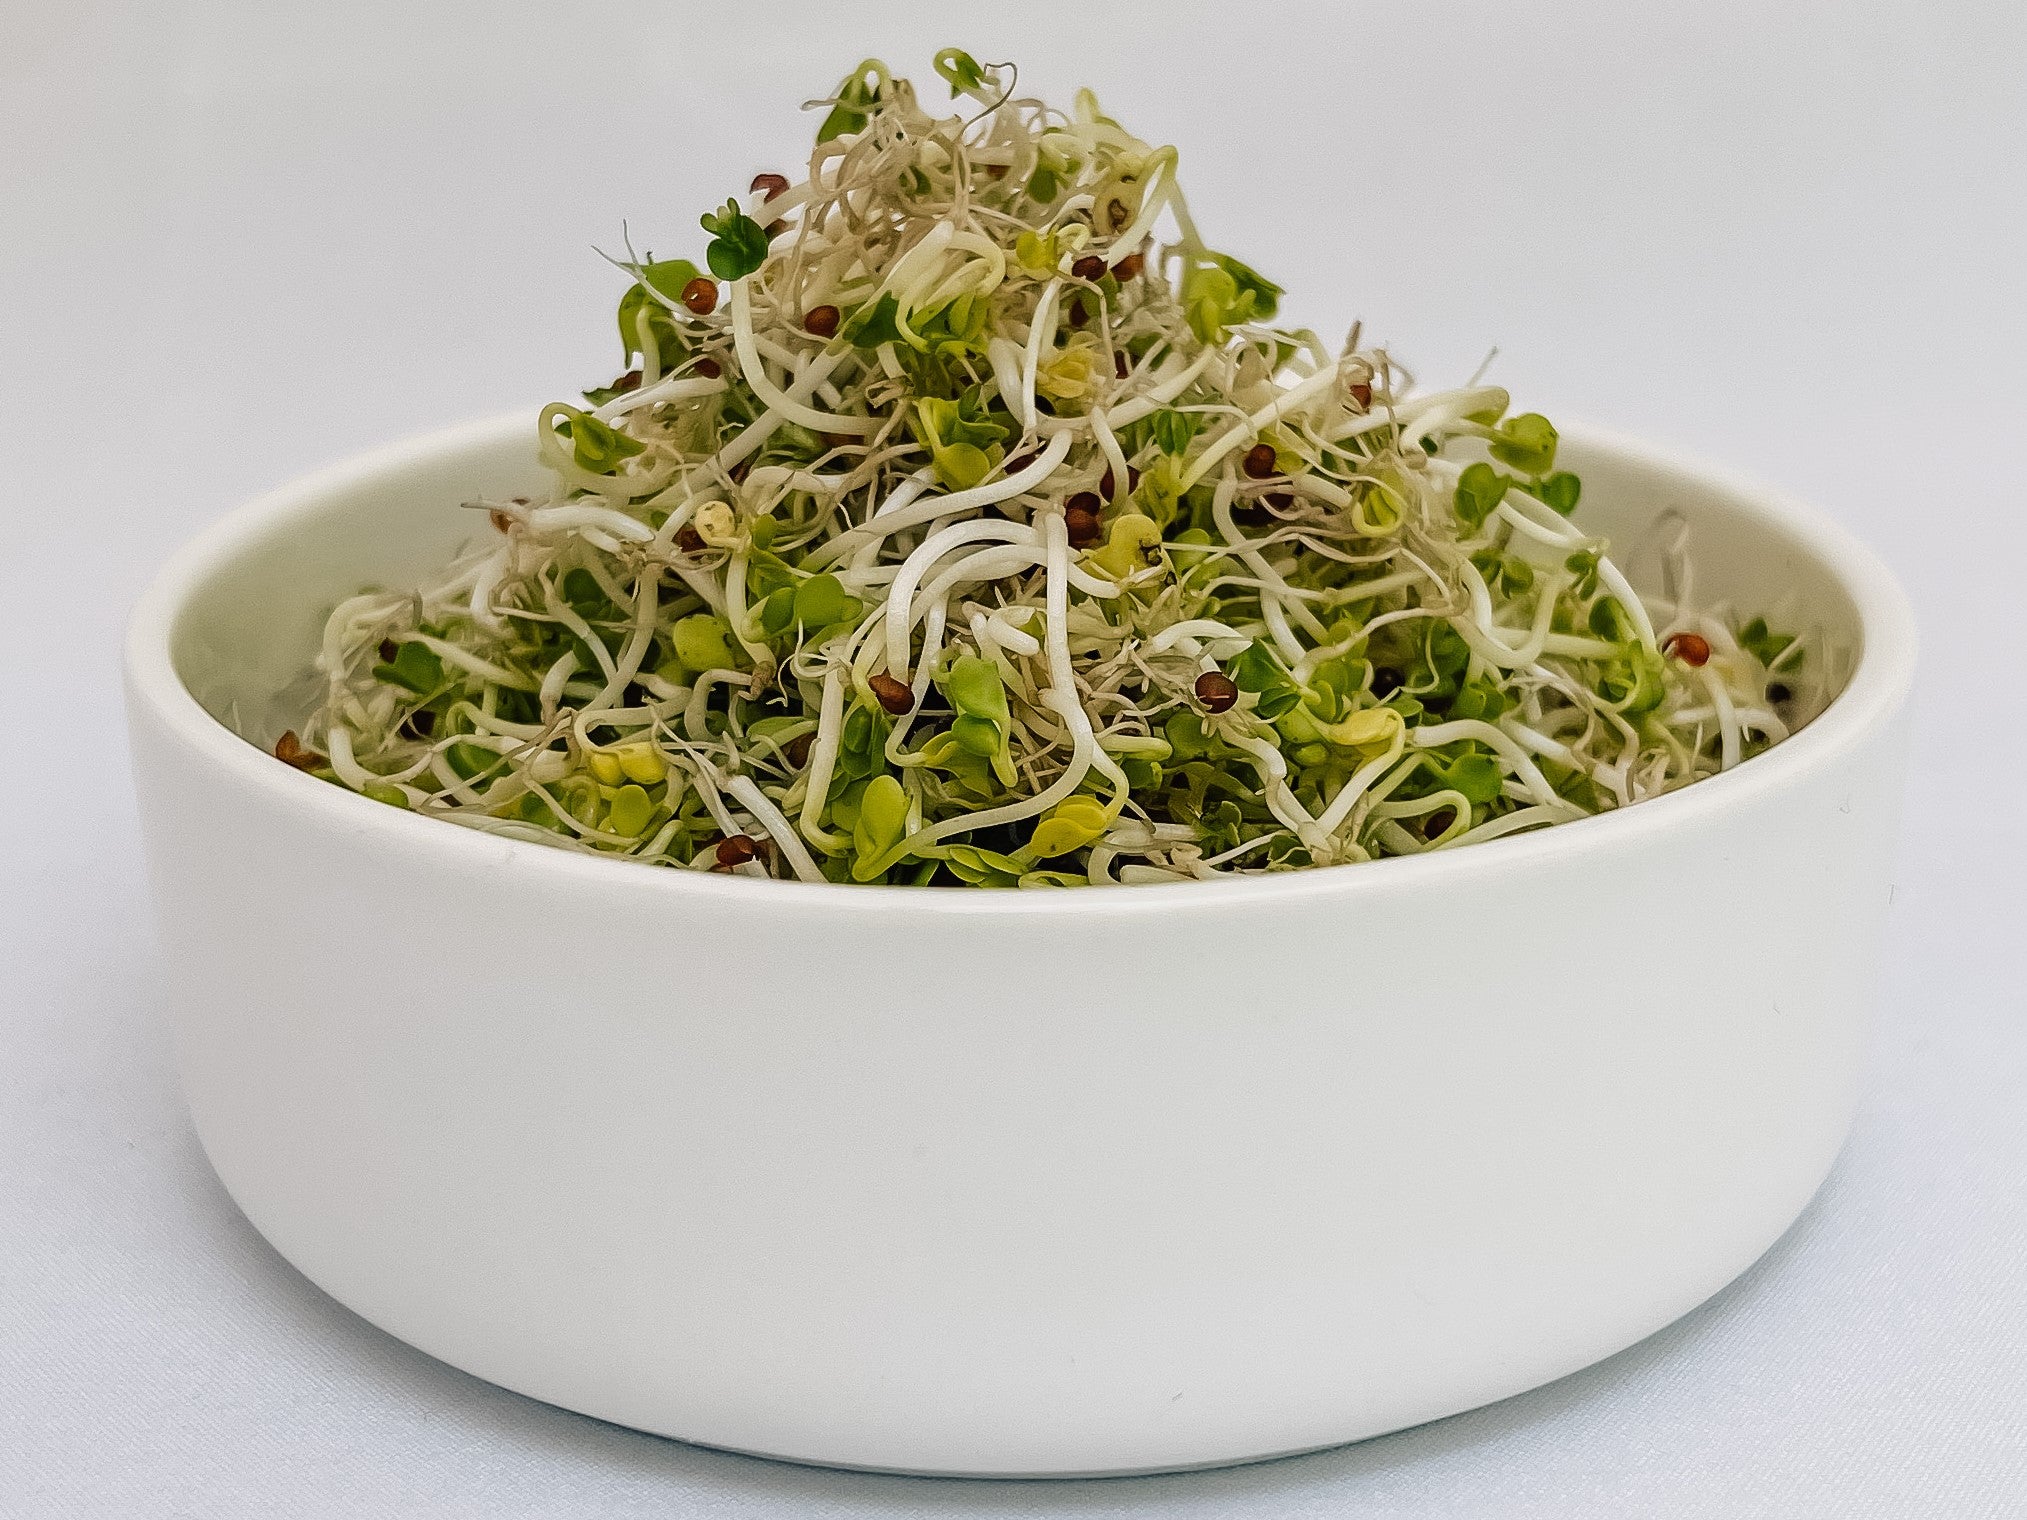 Broccoli sprouts in a bowl